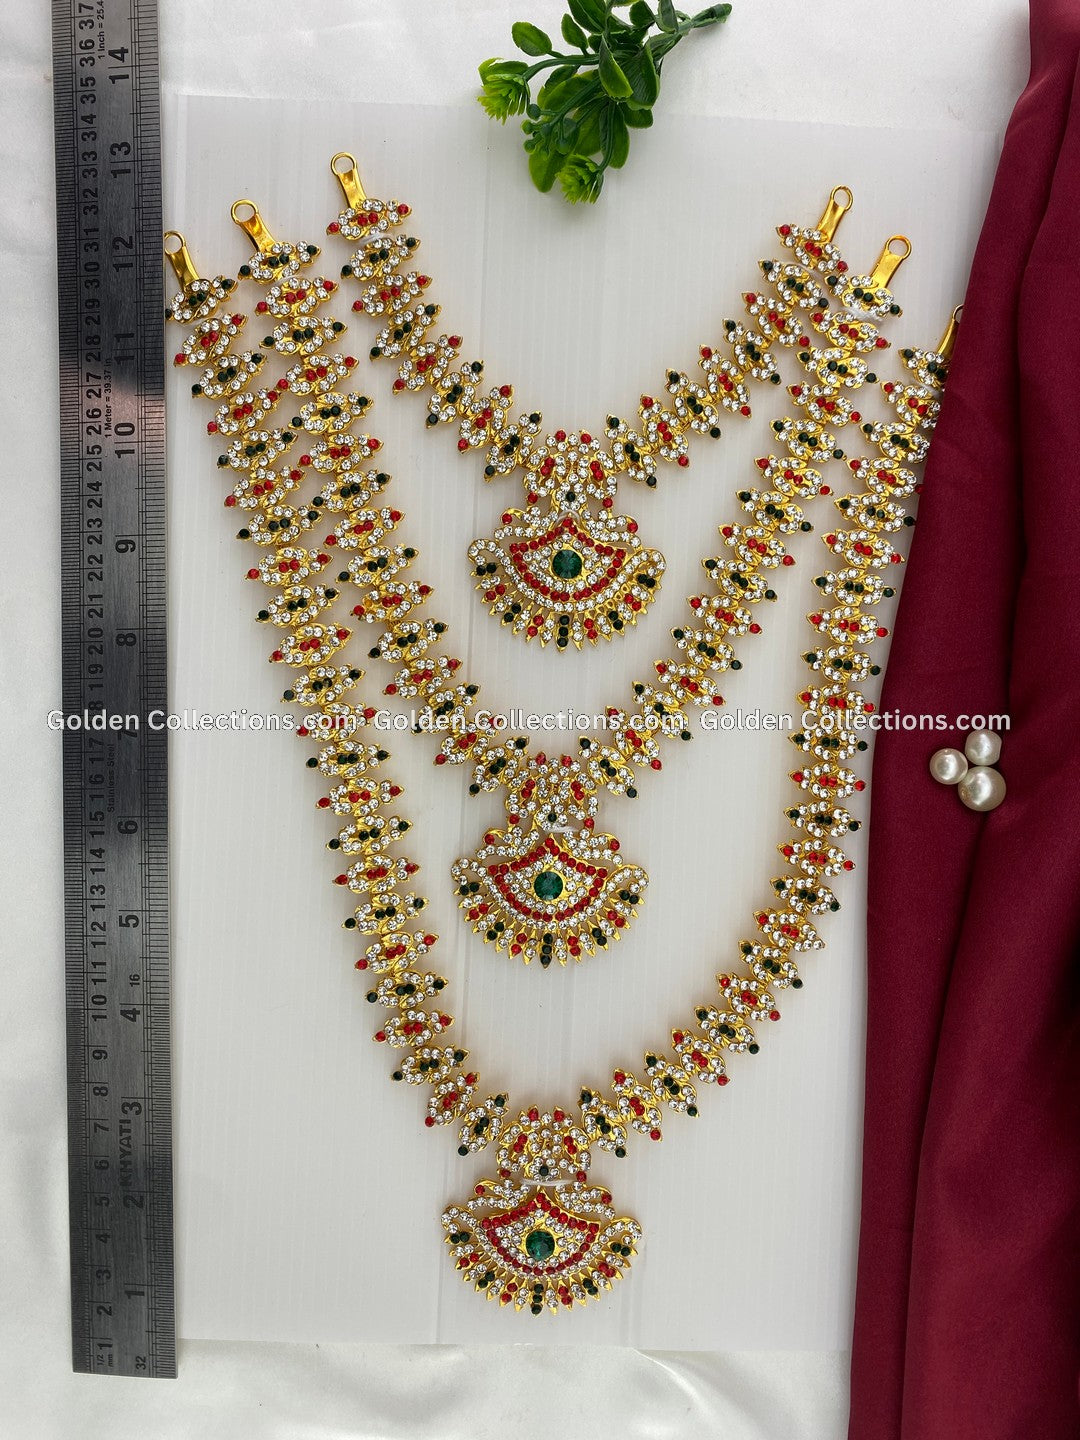 Authentic Temple Deity Necklace-GoldenCollections